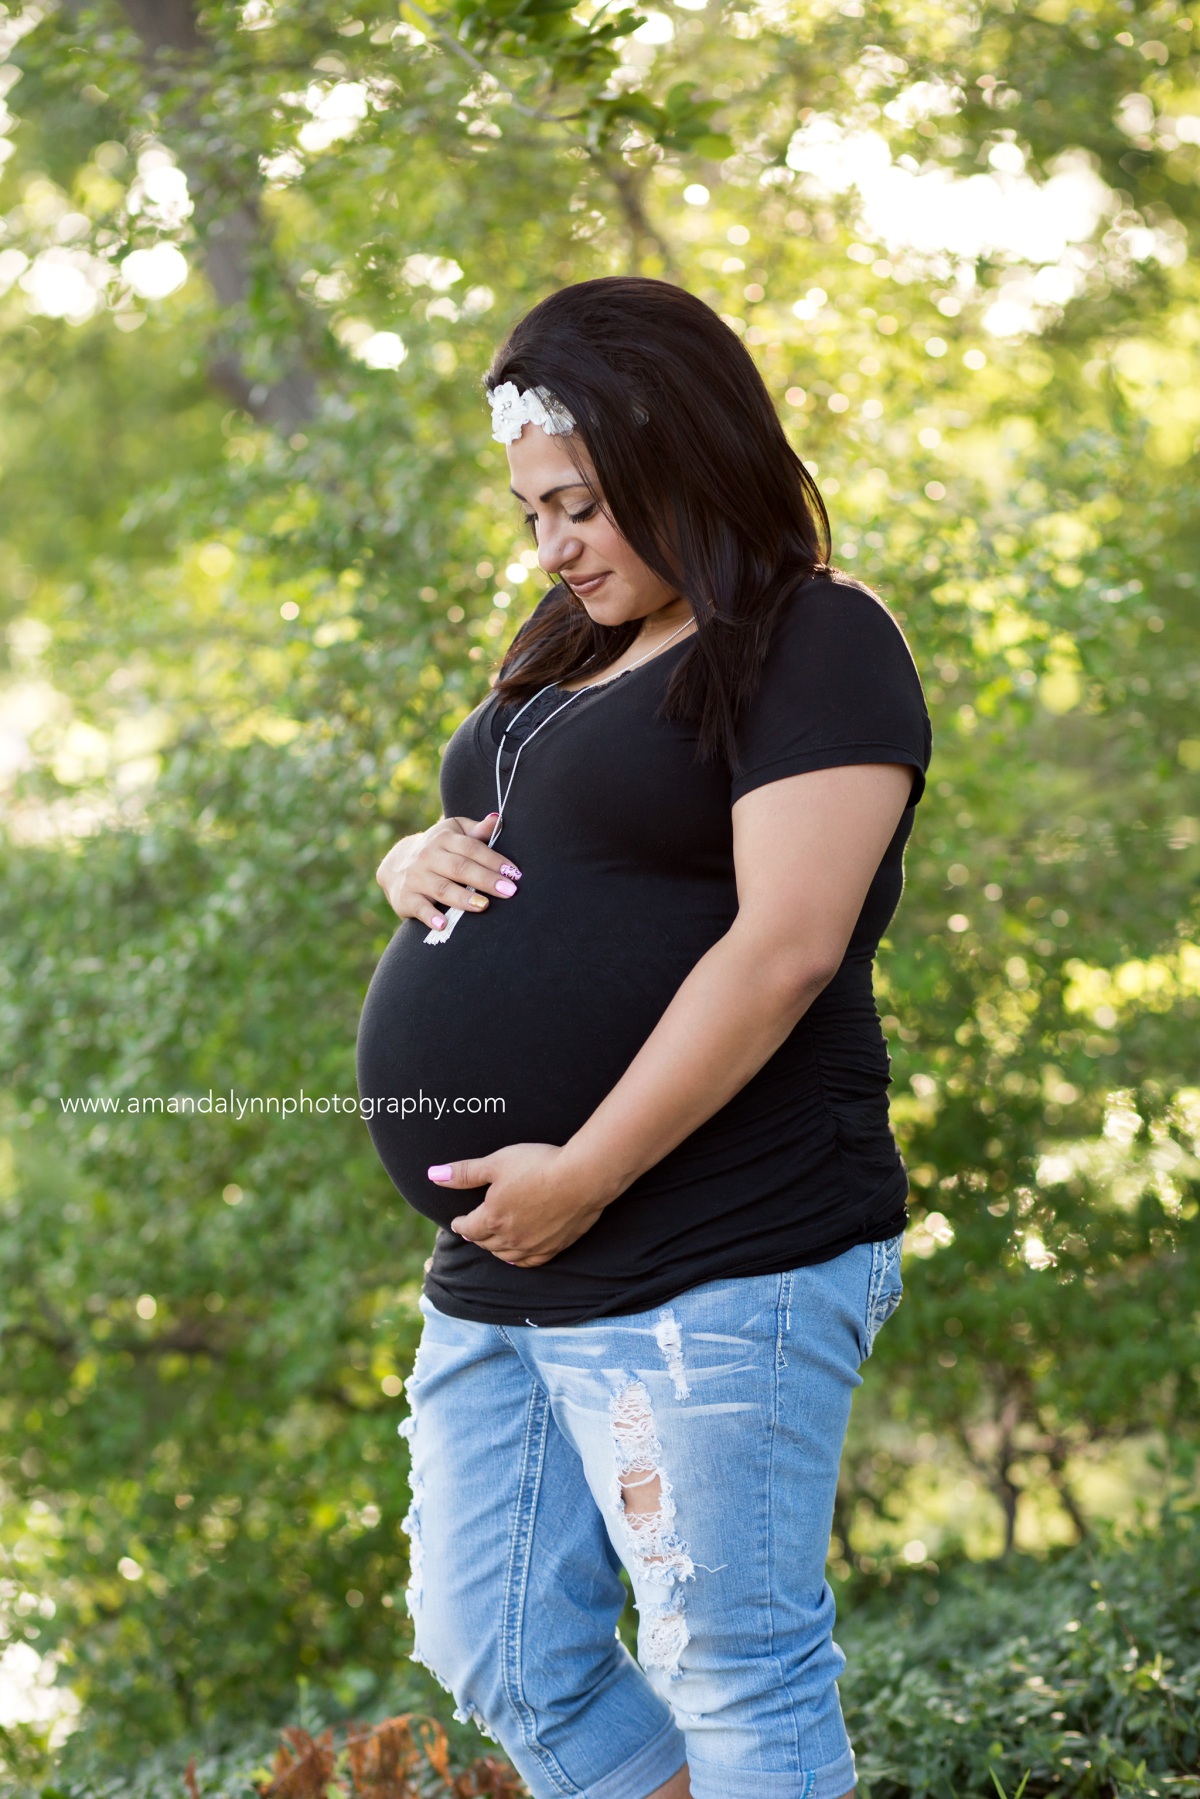 Pregnant woman wearing white flowers in hair posing at a Maternity Photoshoot at Will Rogers Park in Oklahoma City 2016